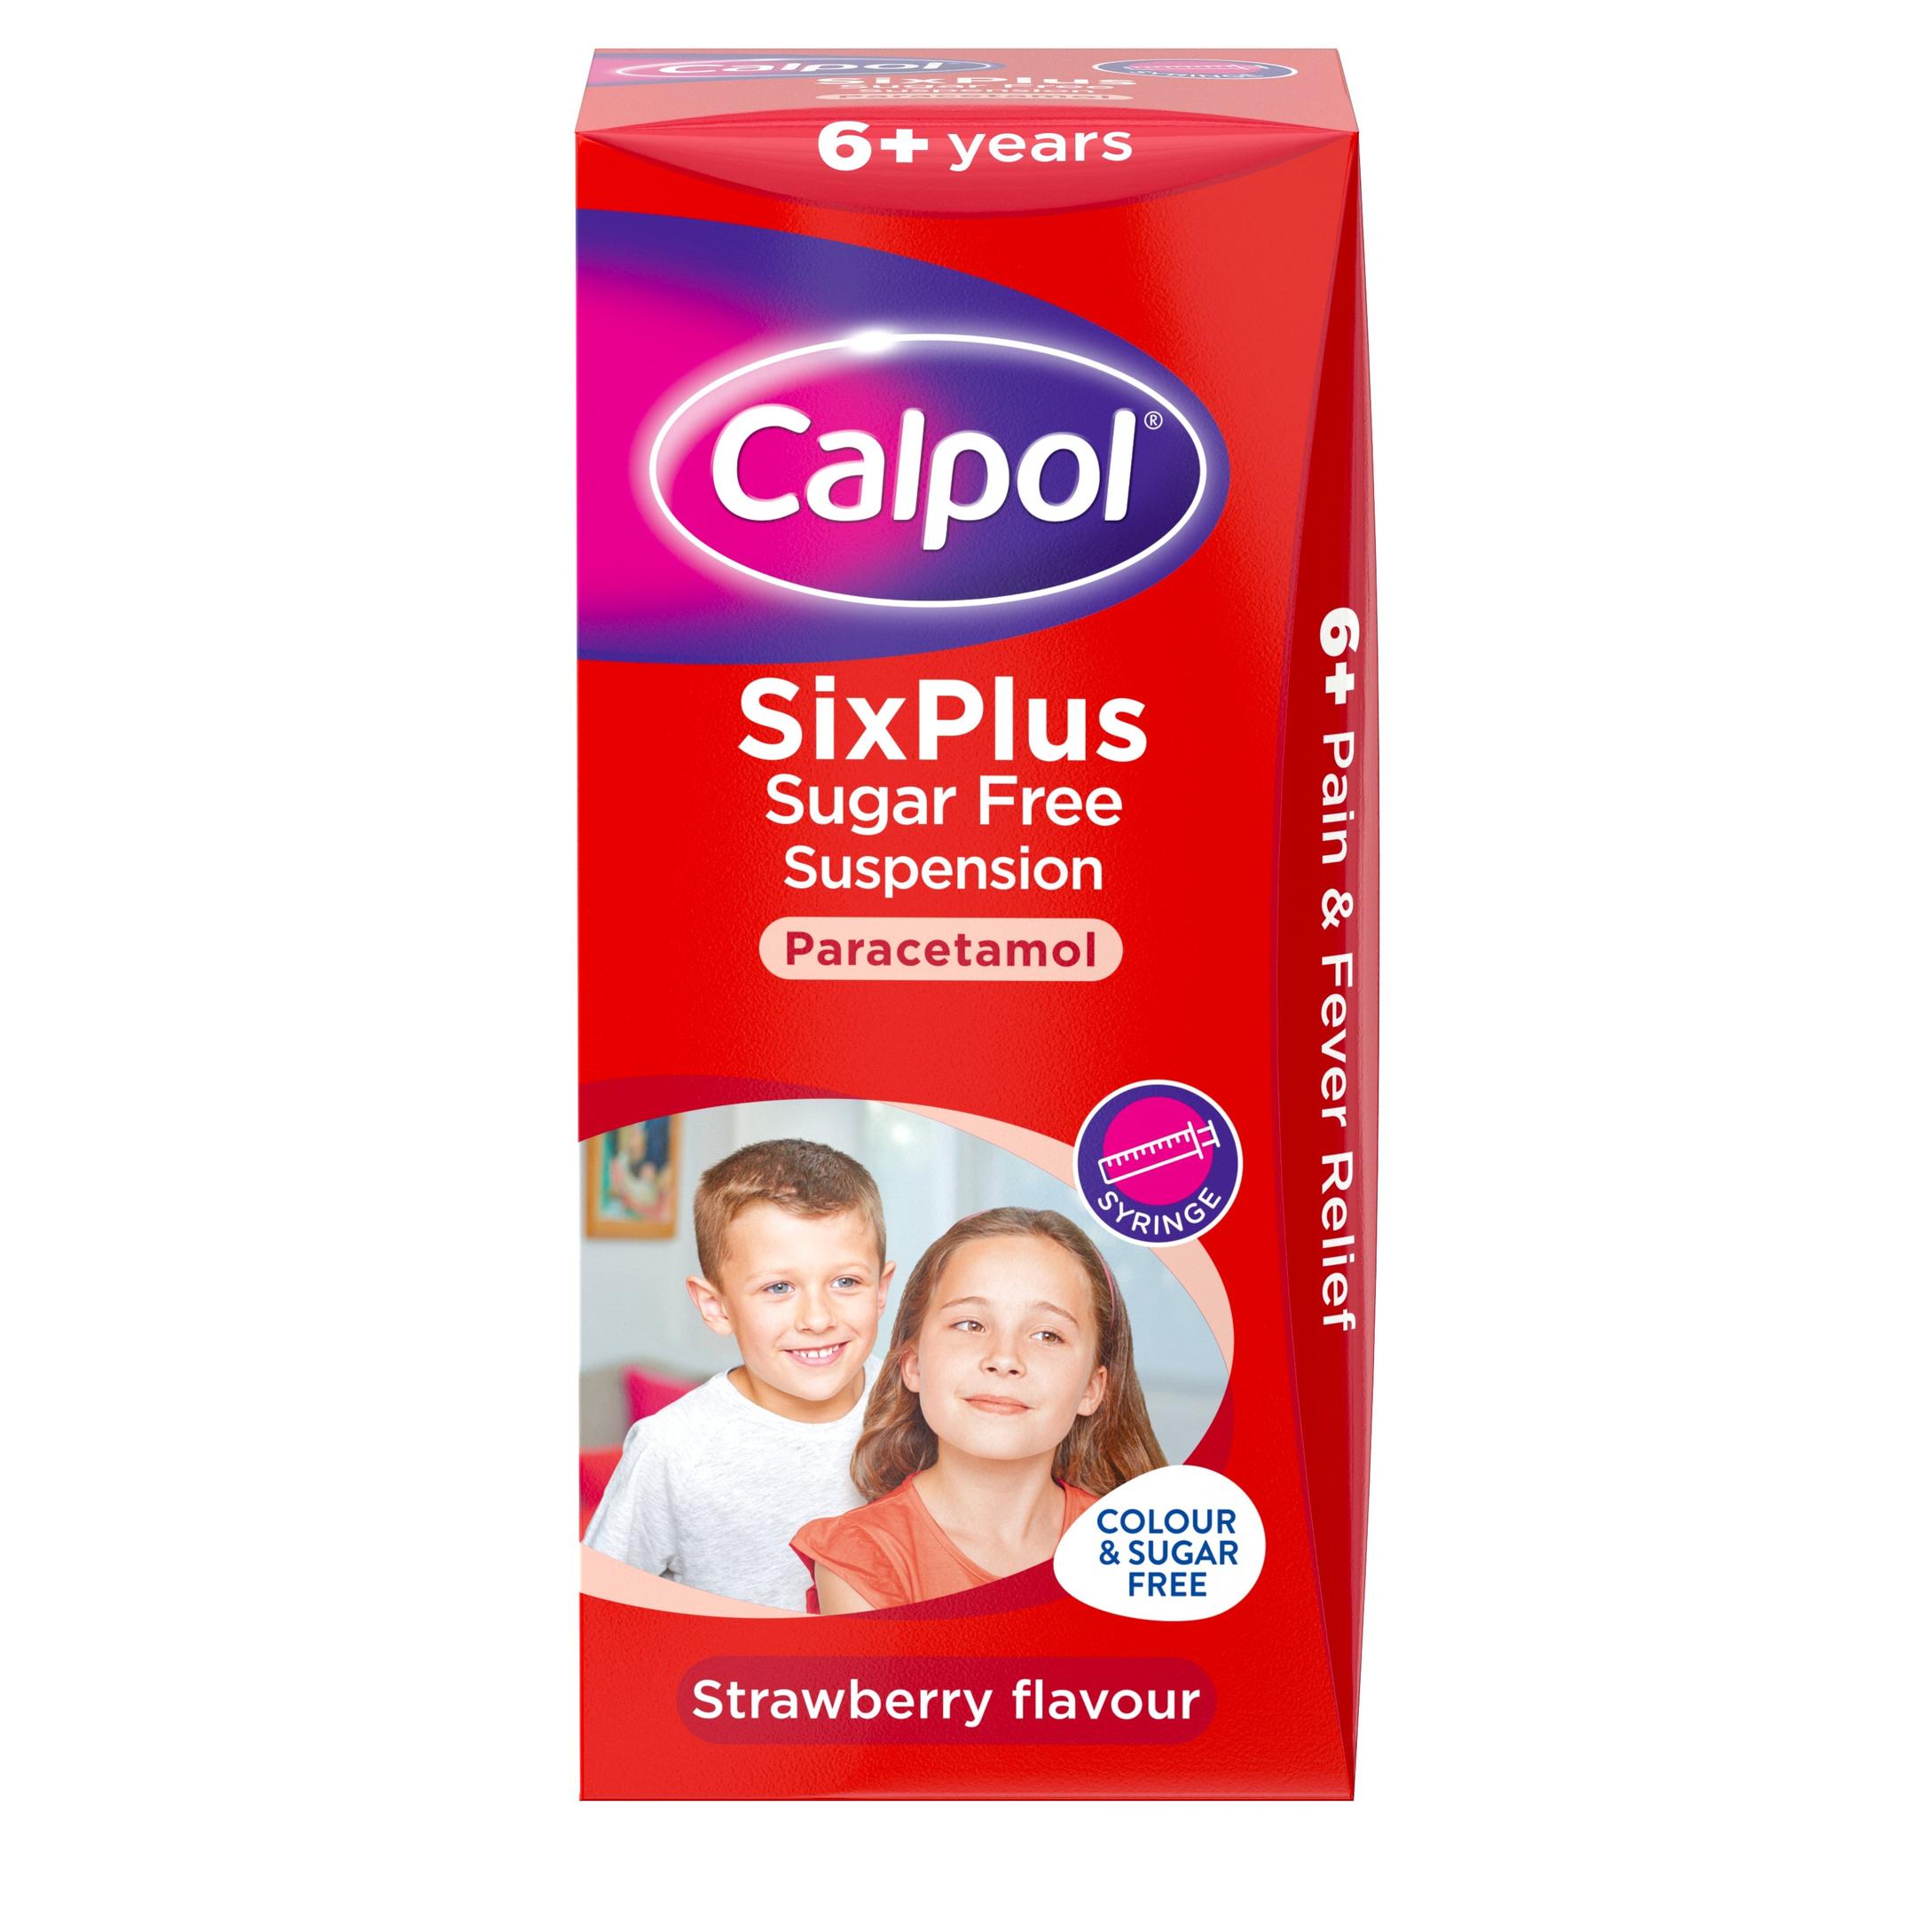 Calpol sixplus sugar free suspension strawberry flavour offers at £549 in Lloyds Pharmacy